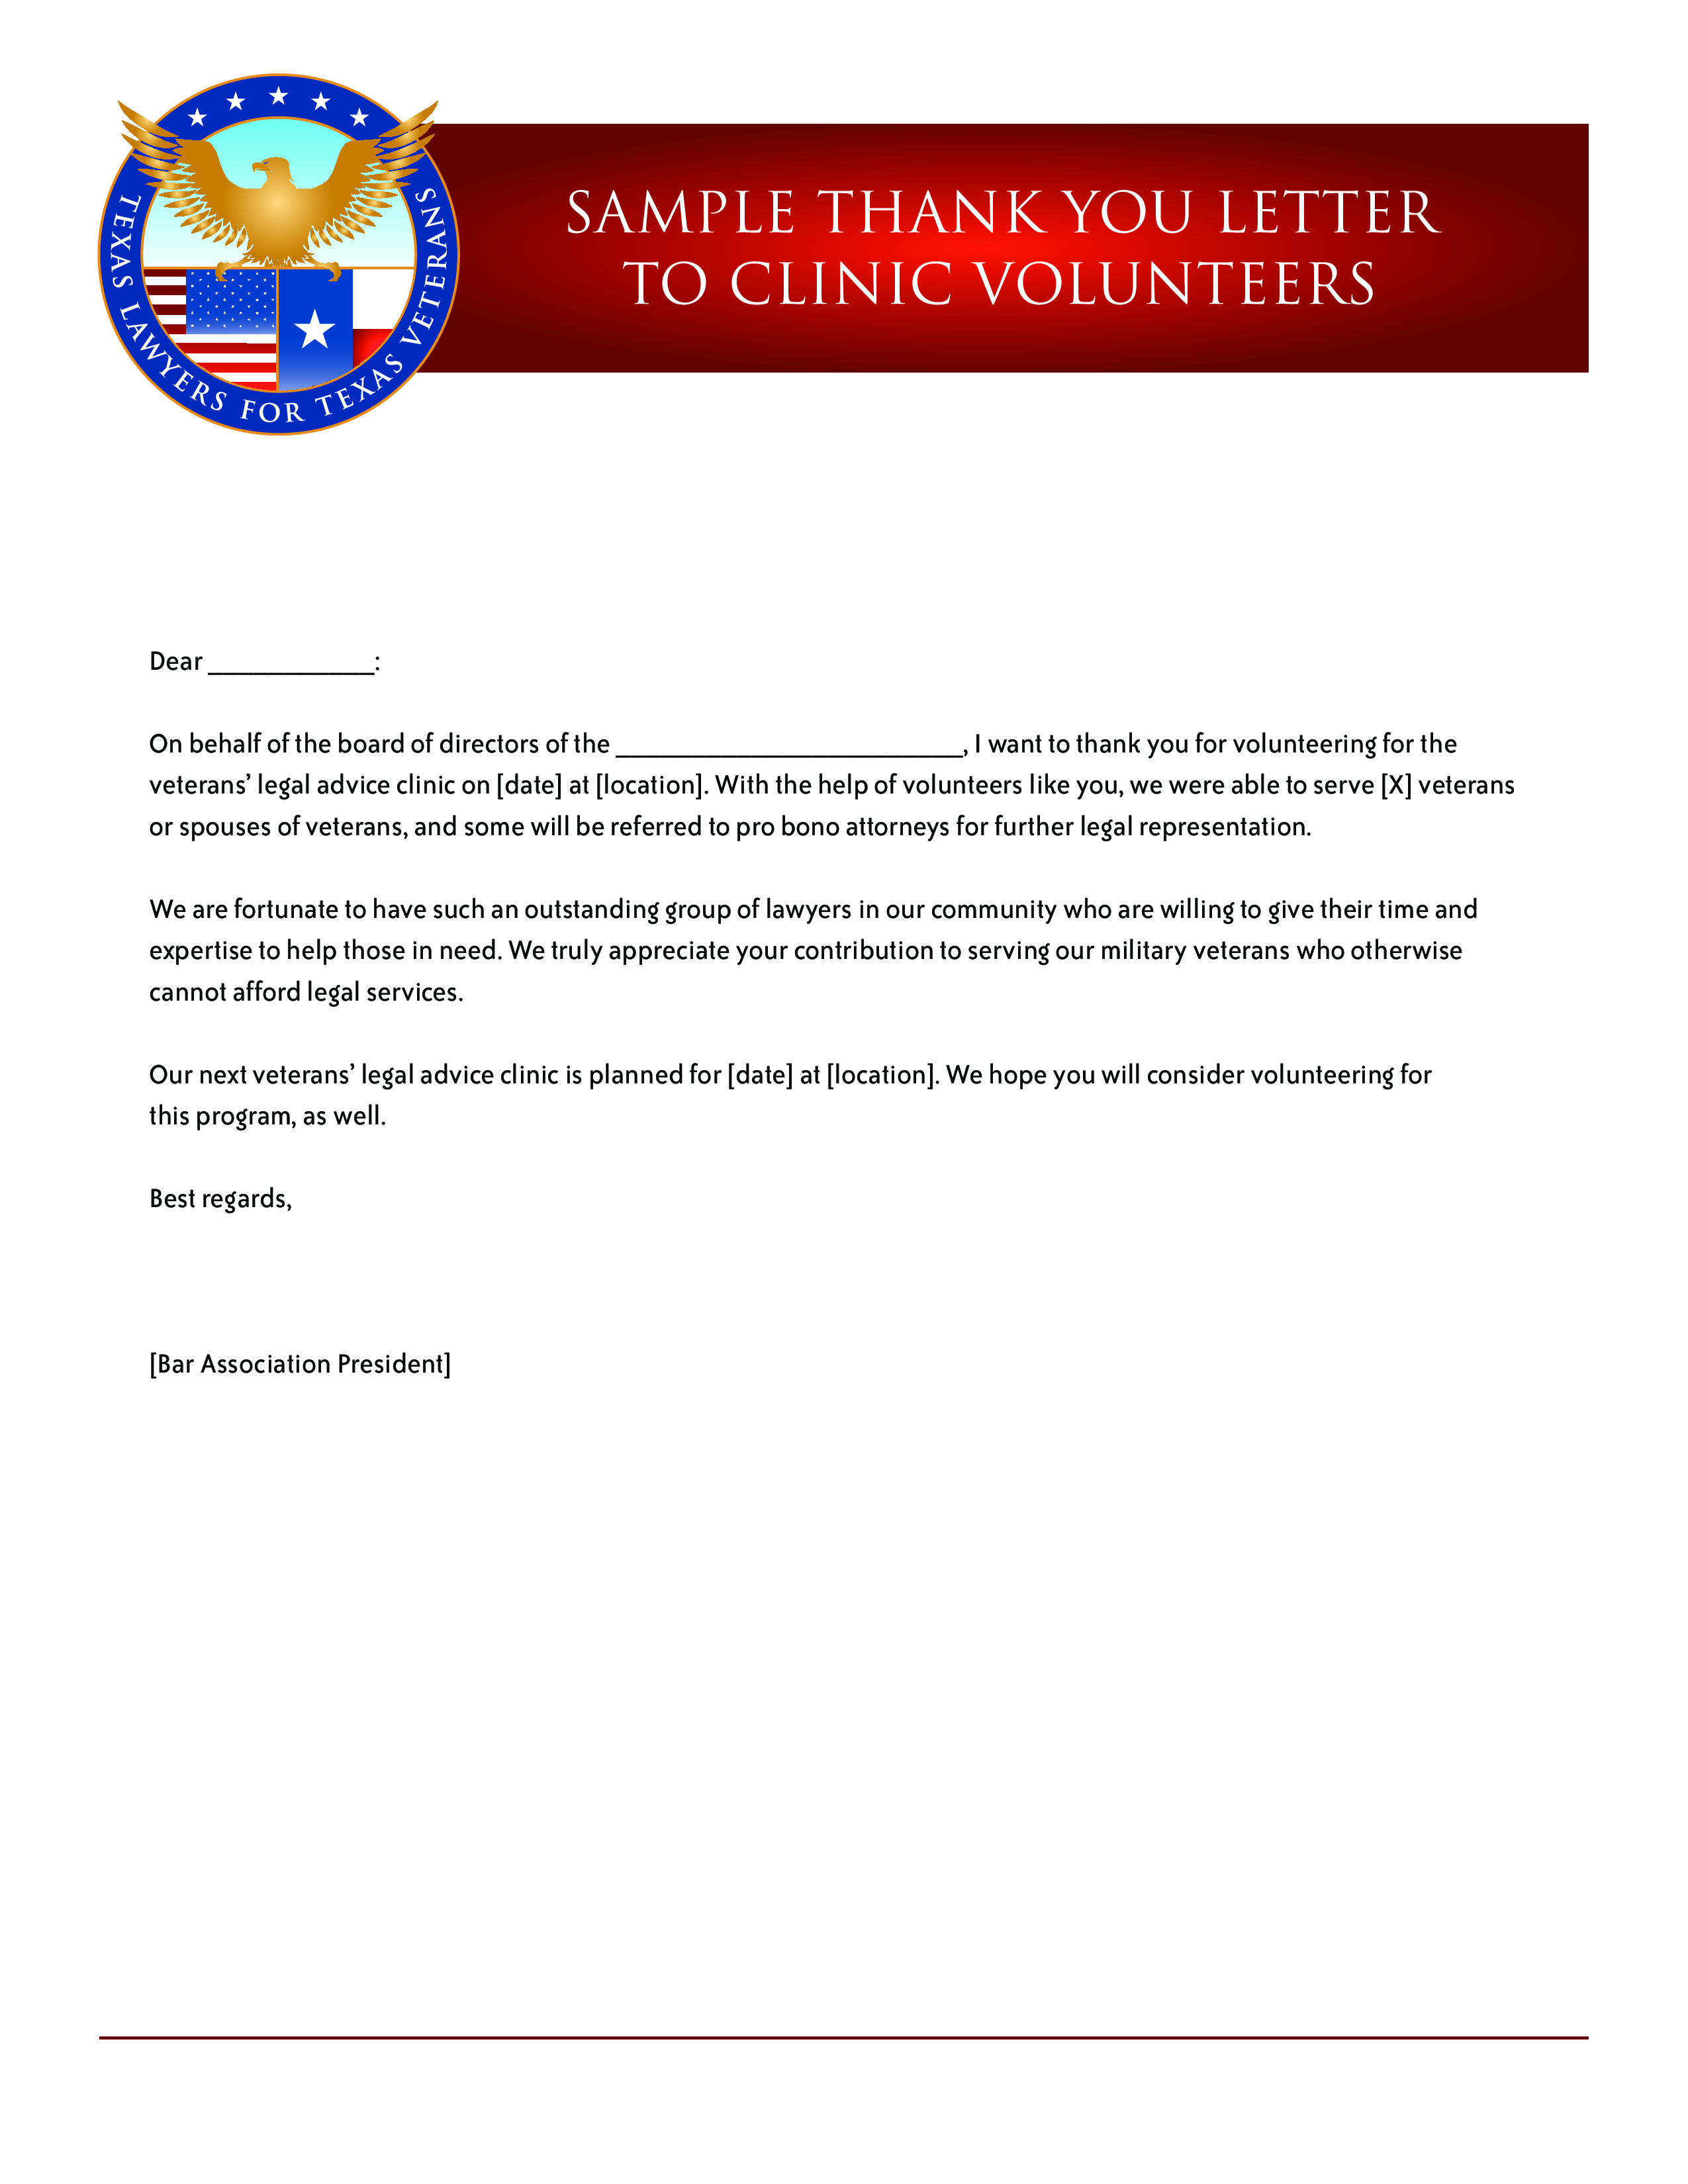 Clinic Volunteer Thank You Letter main image